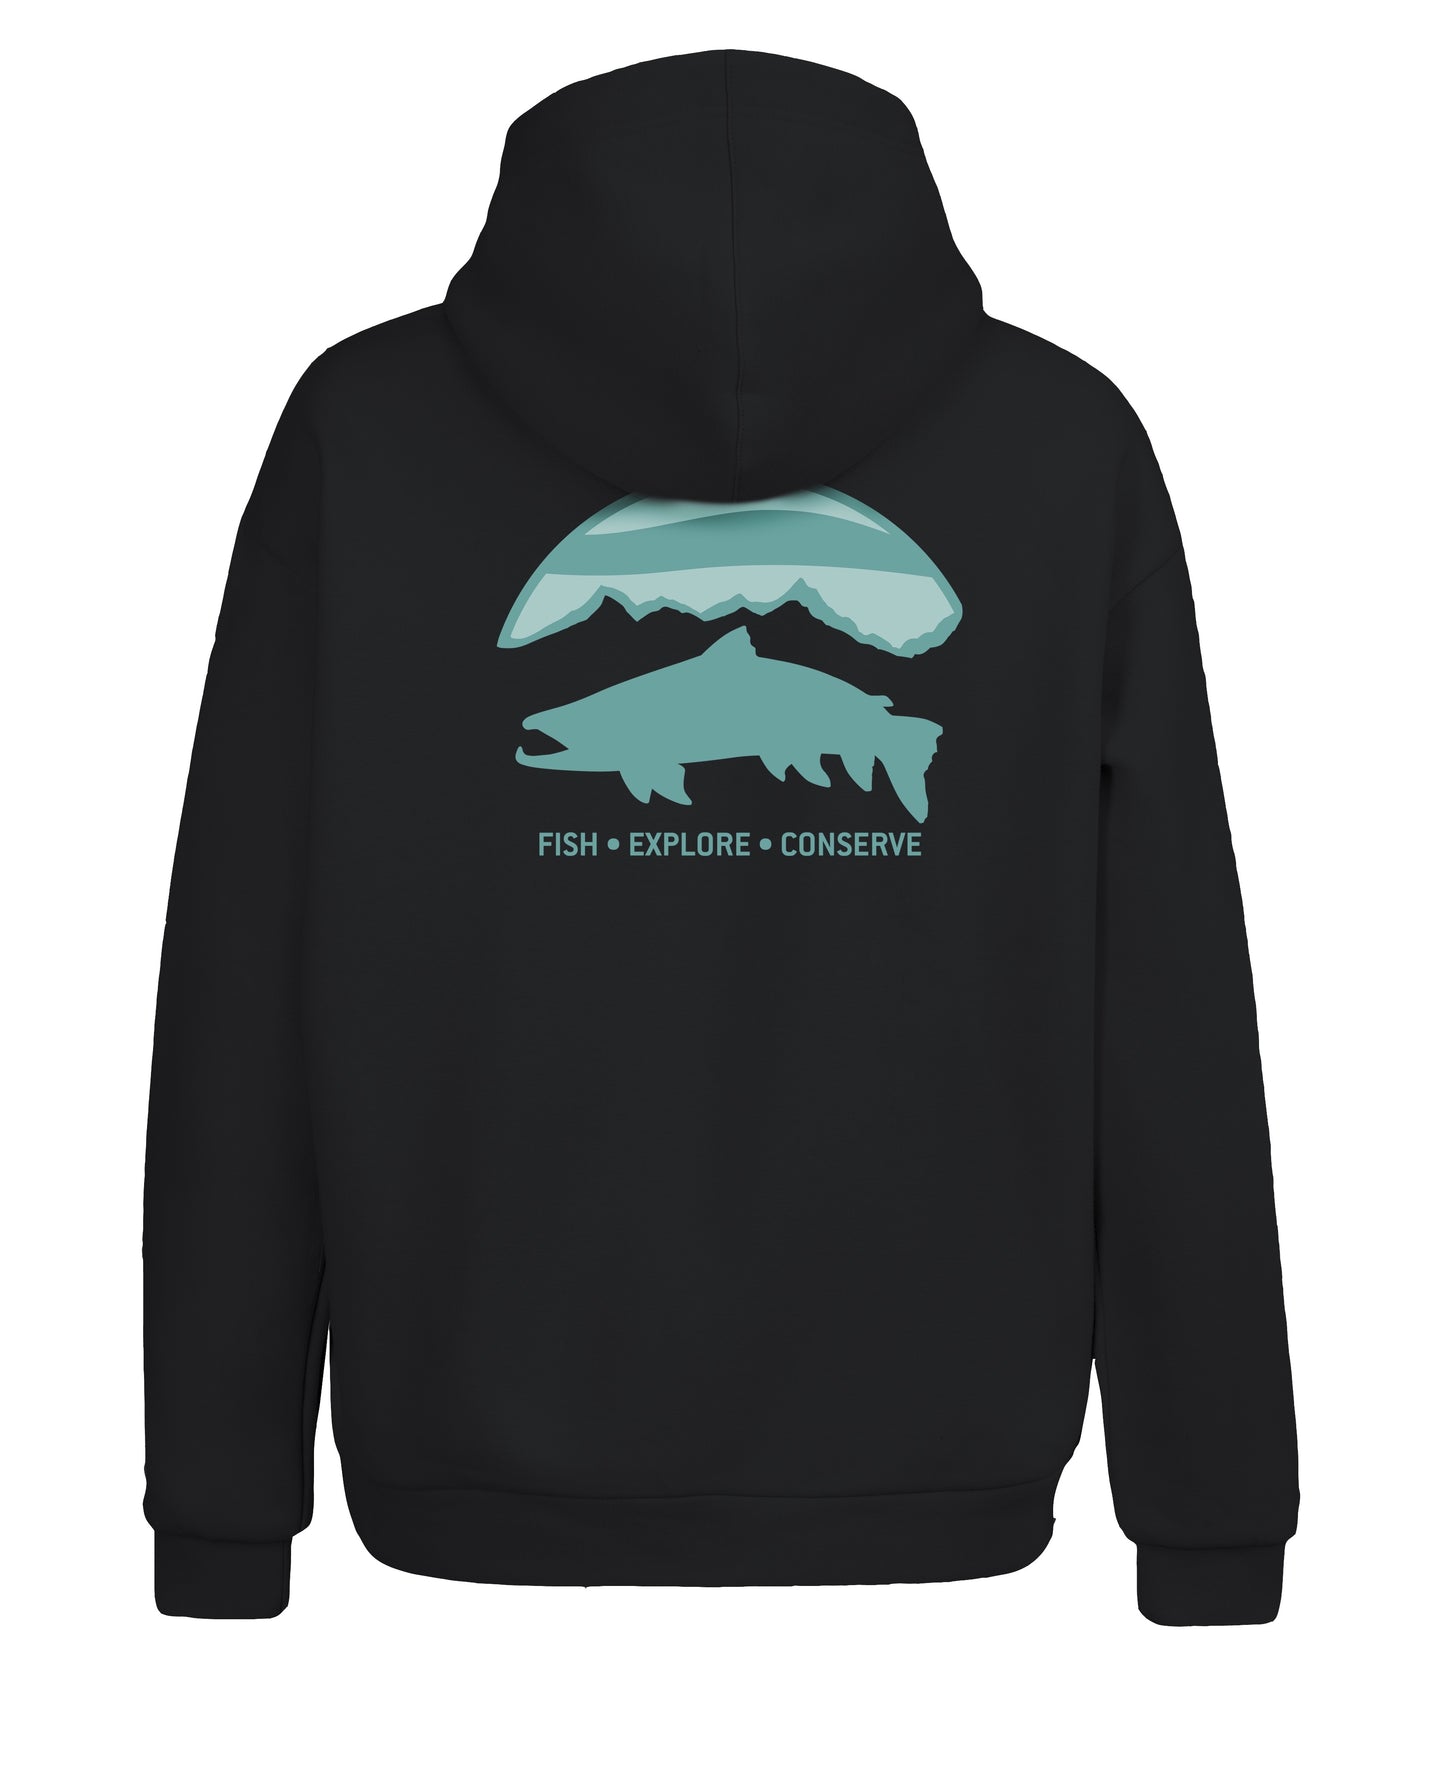 Backcountry Trout Eco Hoody